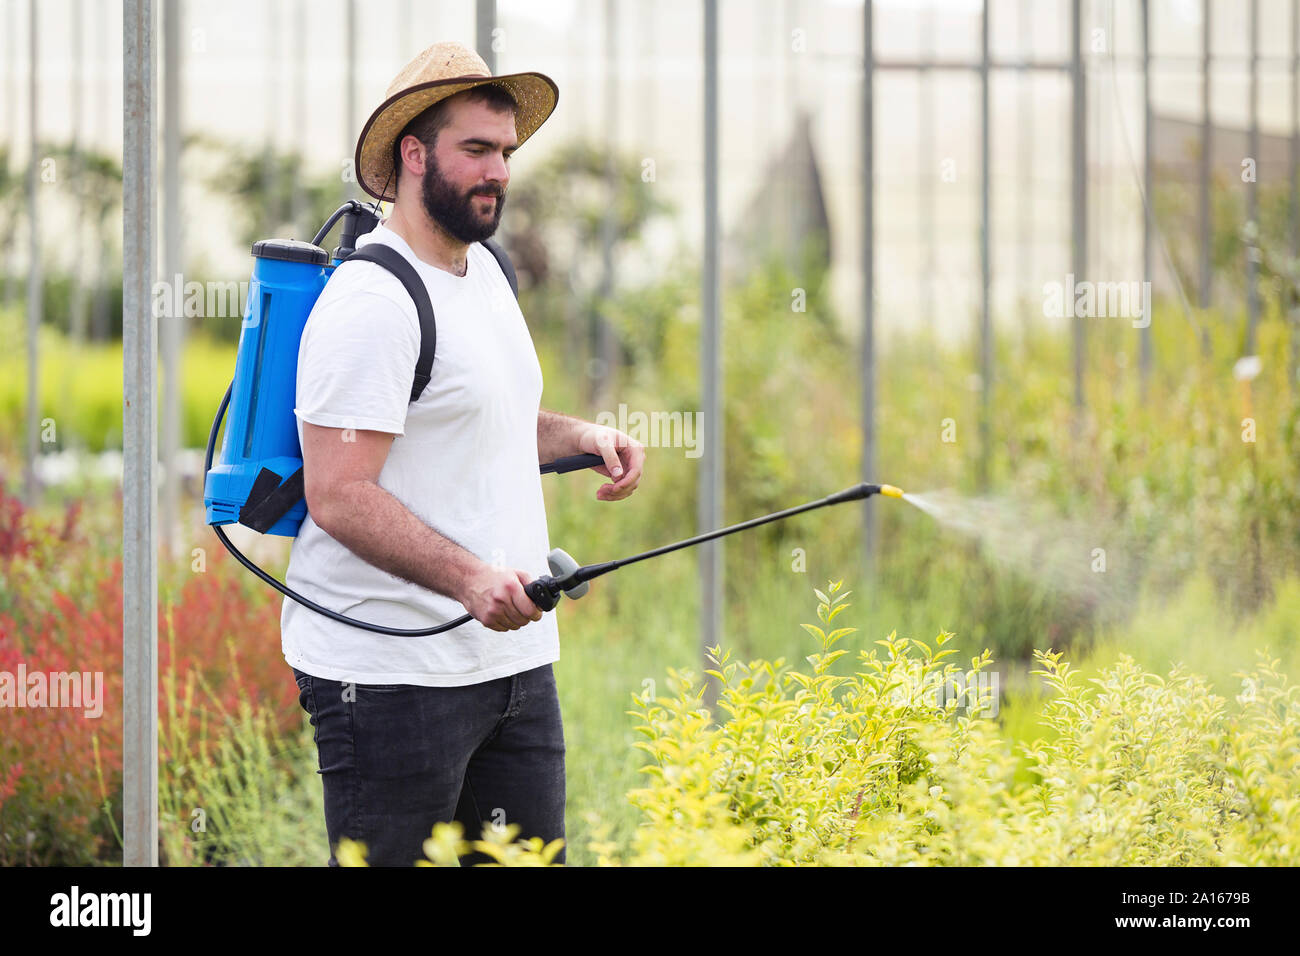 Young man spraying herbicide on plants in the greenhouse Stock Photo